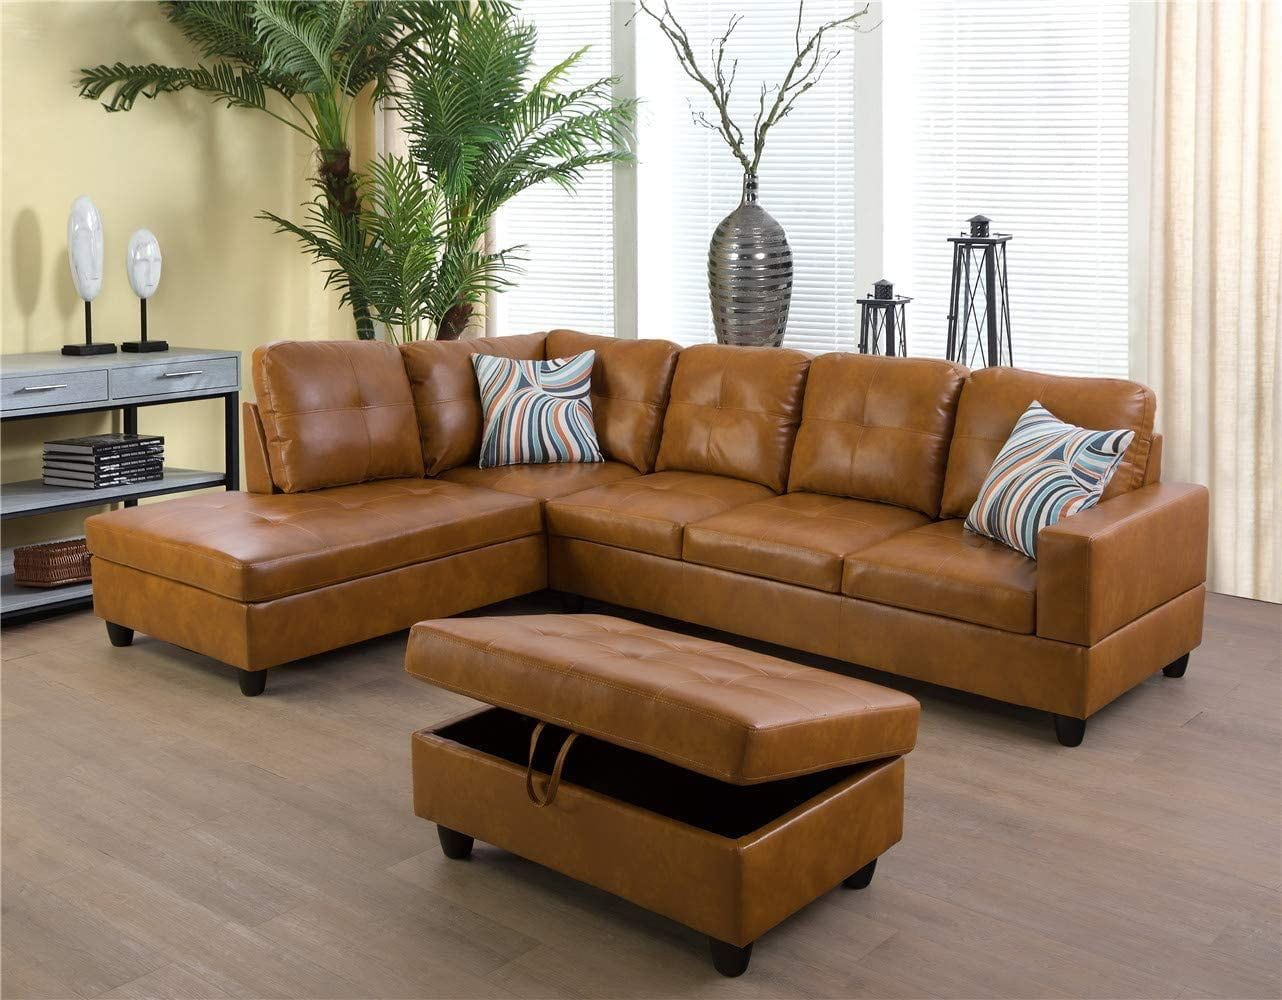 Ponliving Furniture Caramel 103.5'' Sectional Sofa With Storage Ottoman Regarding Sofas With Ottomans In Brown (Gallery 16 of 20)